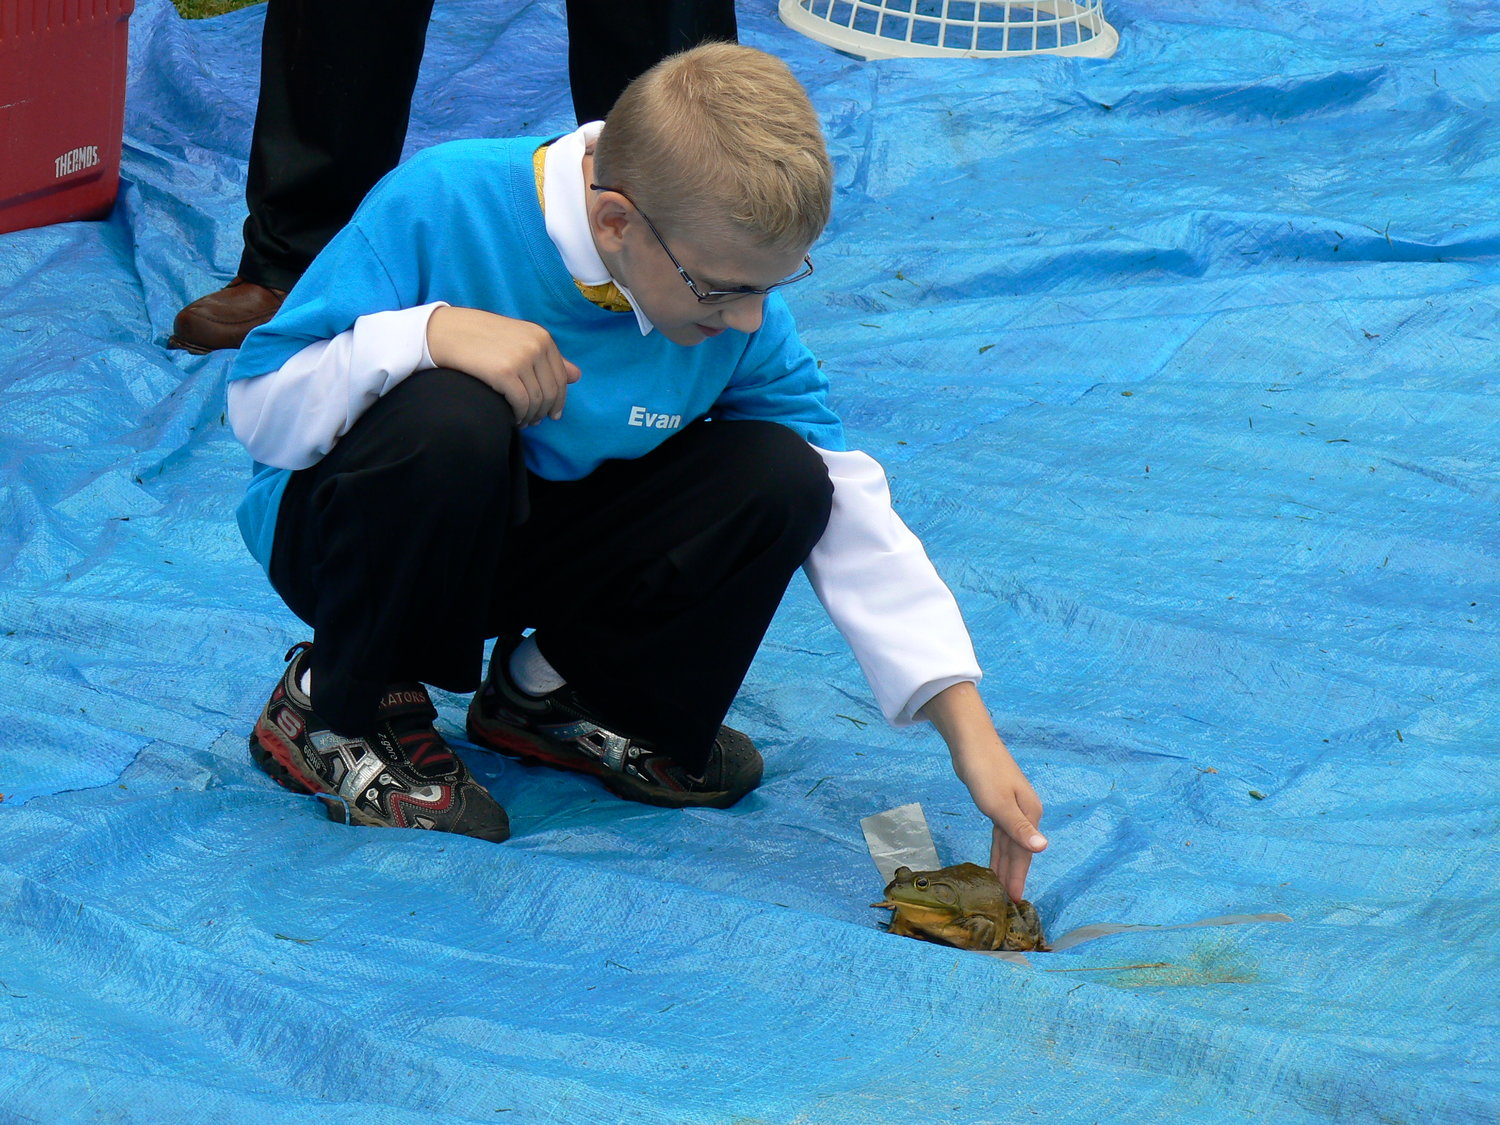 The frog-jumping competition is one of the most popular events at the Walden Harvest Festival.